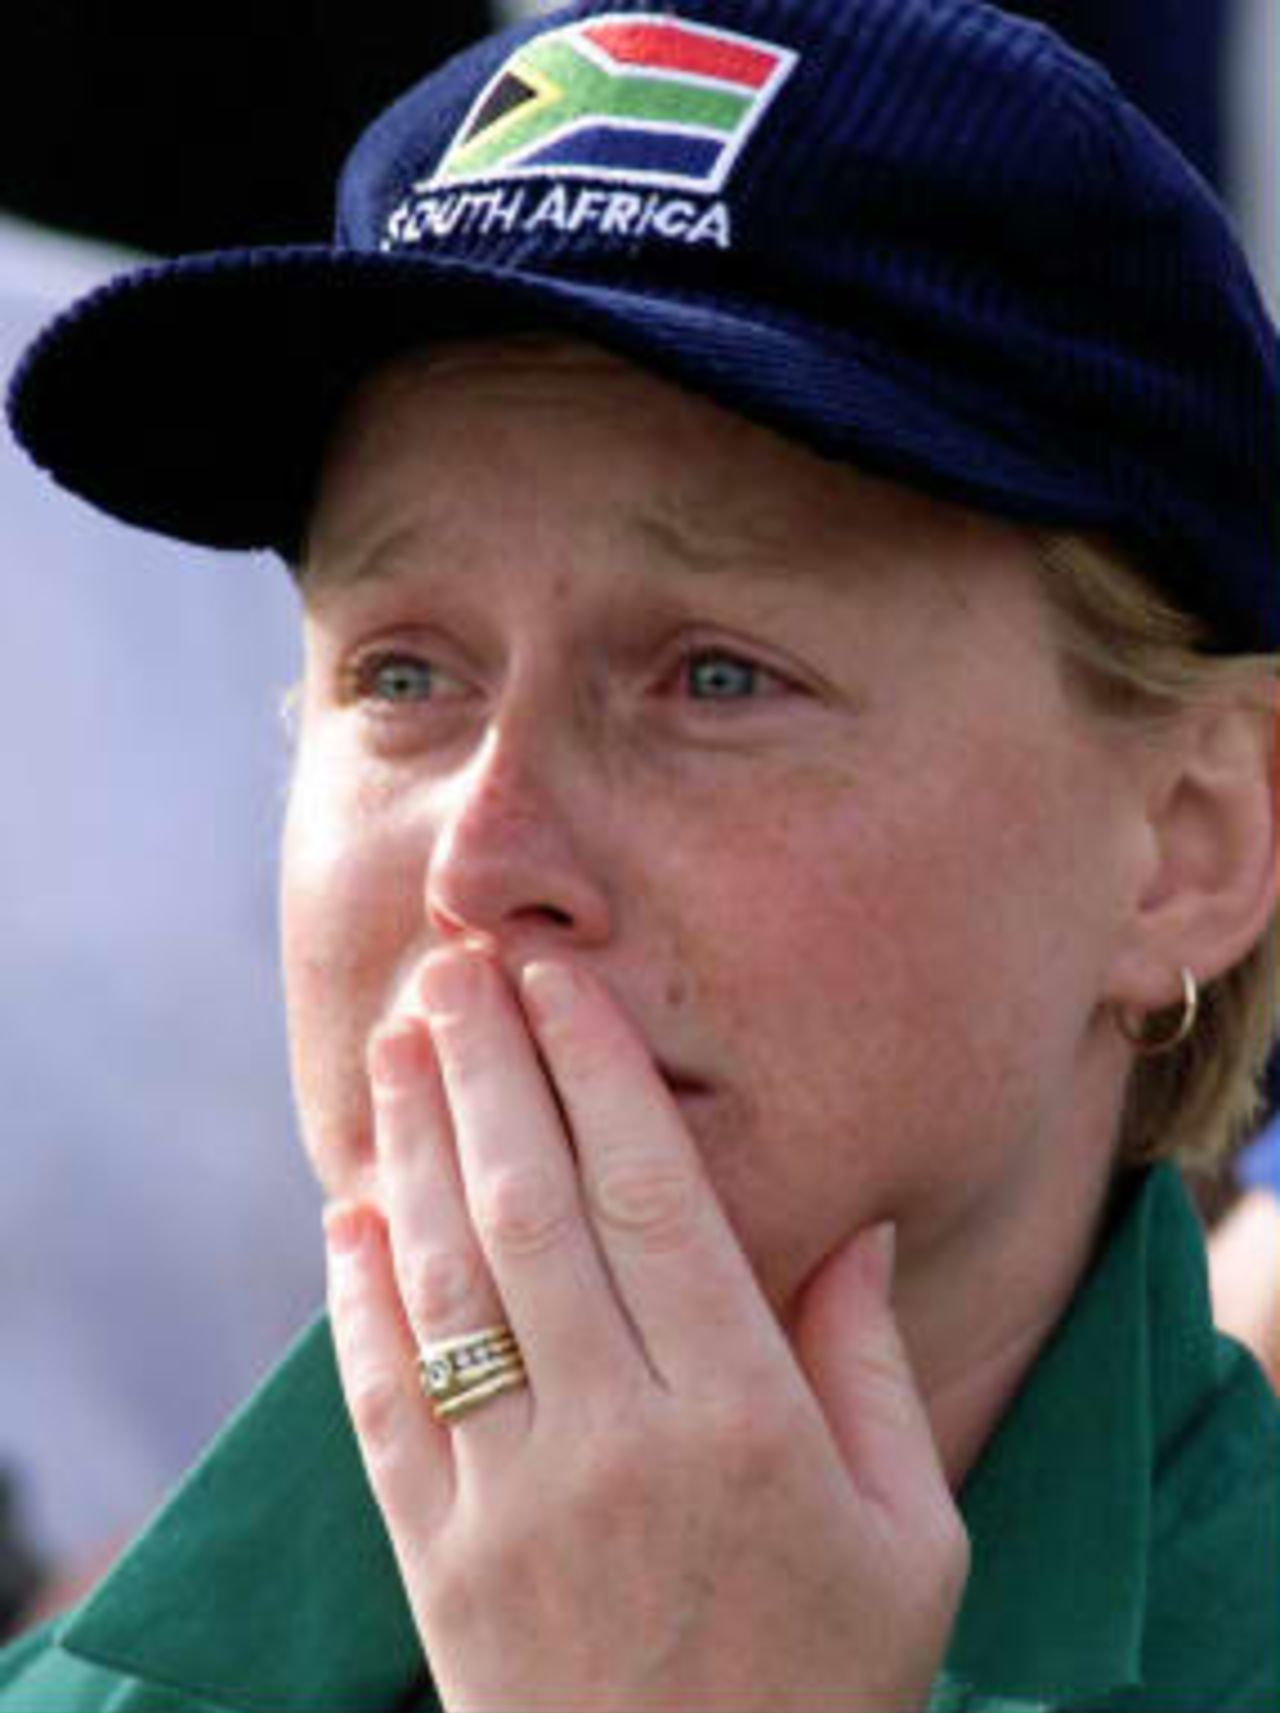 Heartbreak for a South Africa cricket fan as the team were put out of the Cricket World Cup at Edgbaston, Birmingham, 17 June 1999.